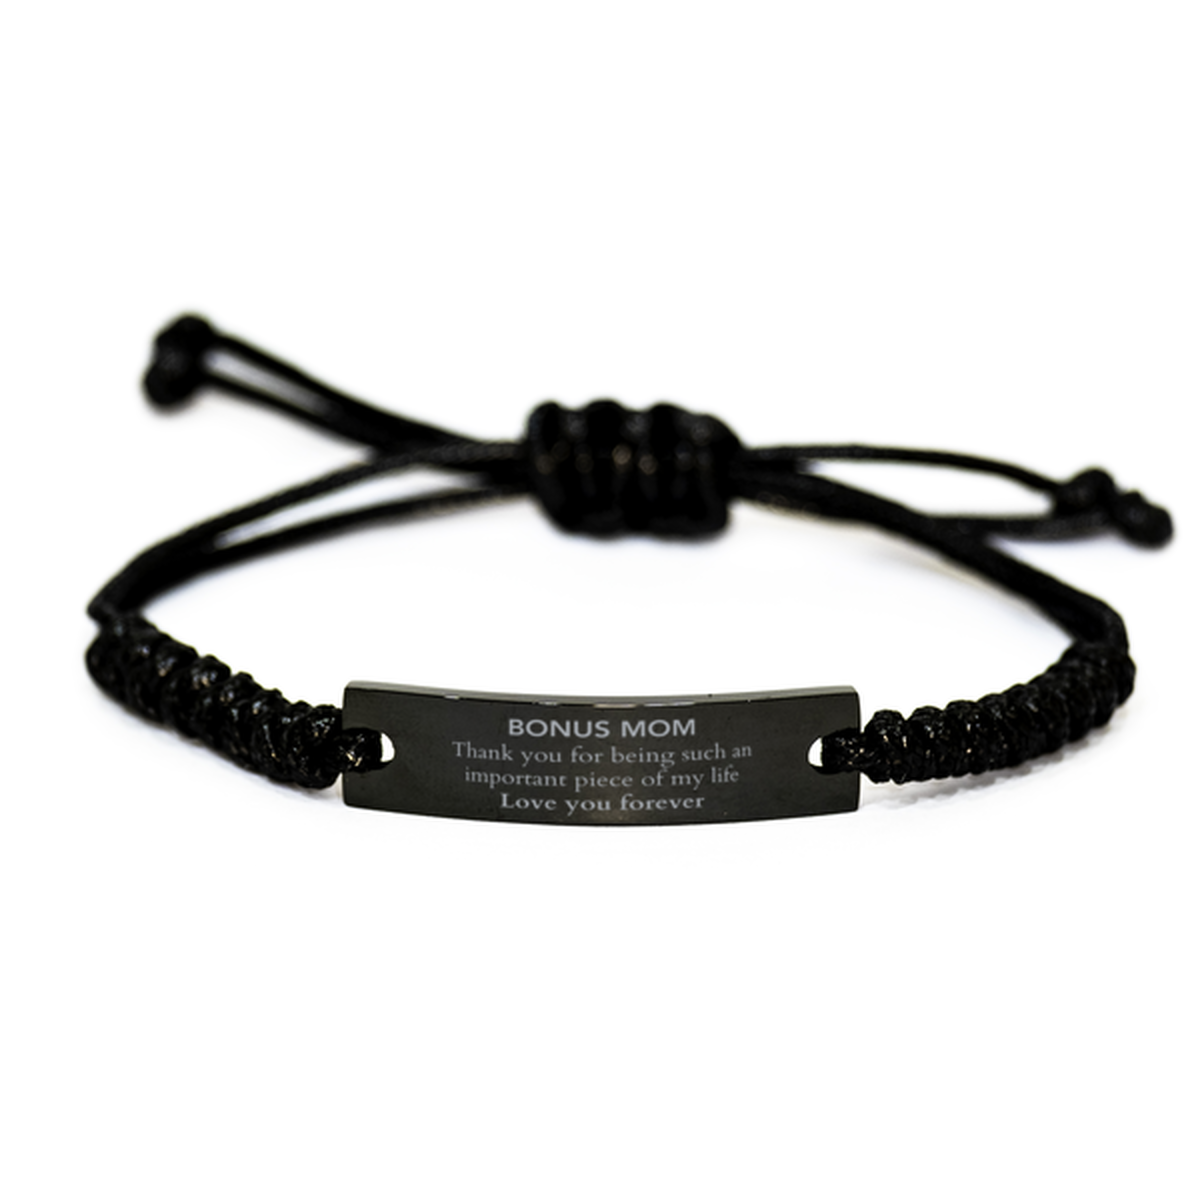 Appropriate Bonus Mom Black Rope Bracelet Epic Birthday Gifts for Bonus Mom Thank you for being such an important piece of my life Bonus Mom Christmas Mothers Fathers Day